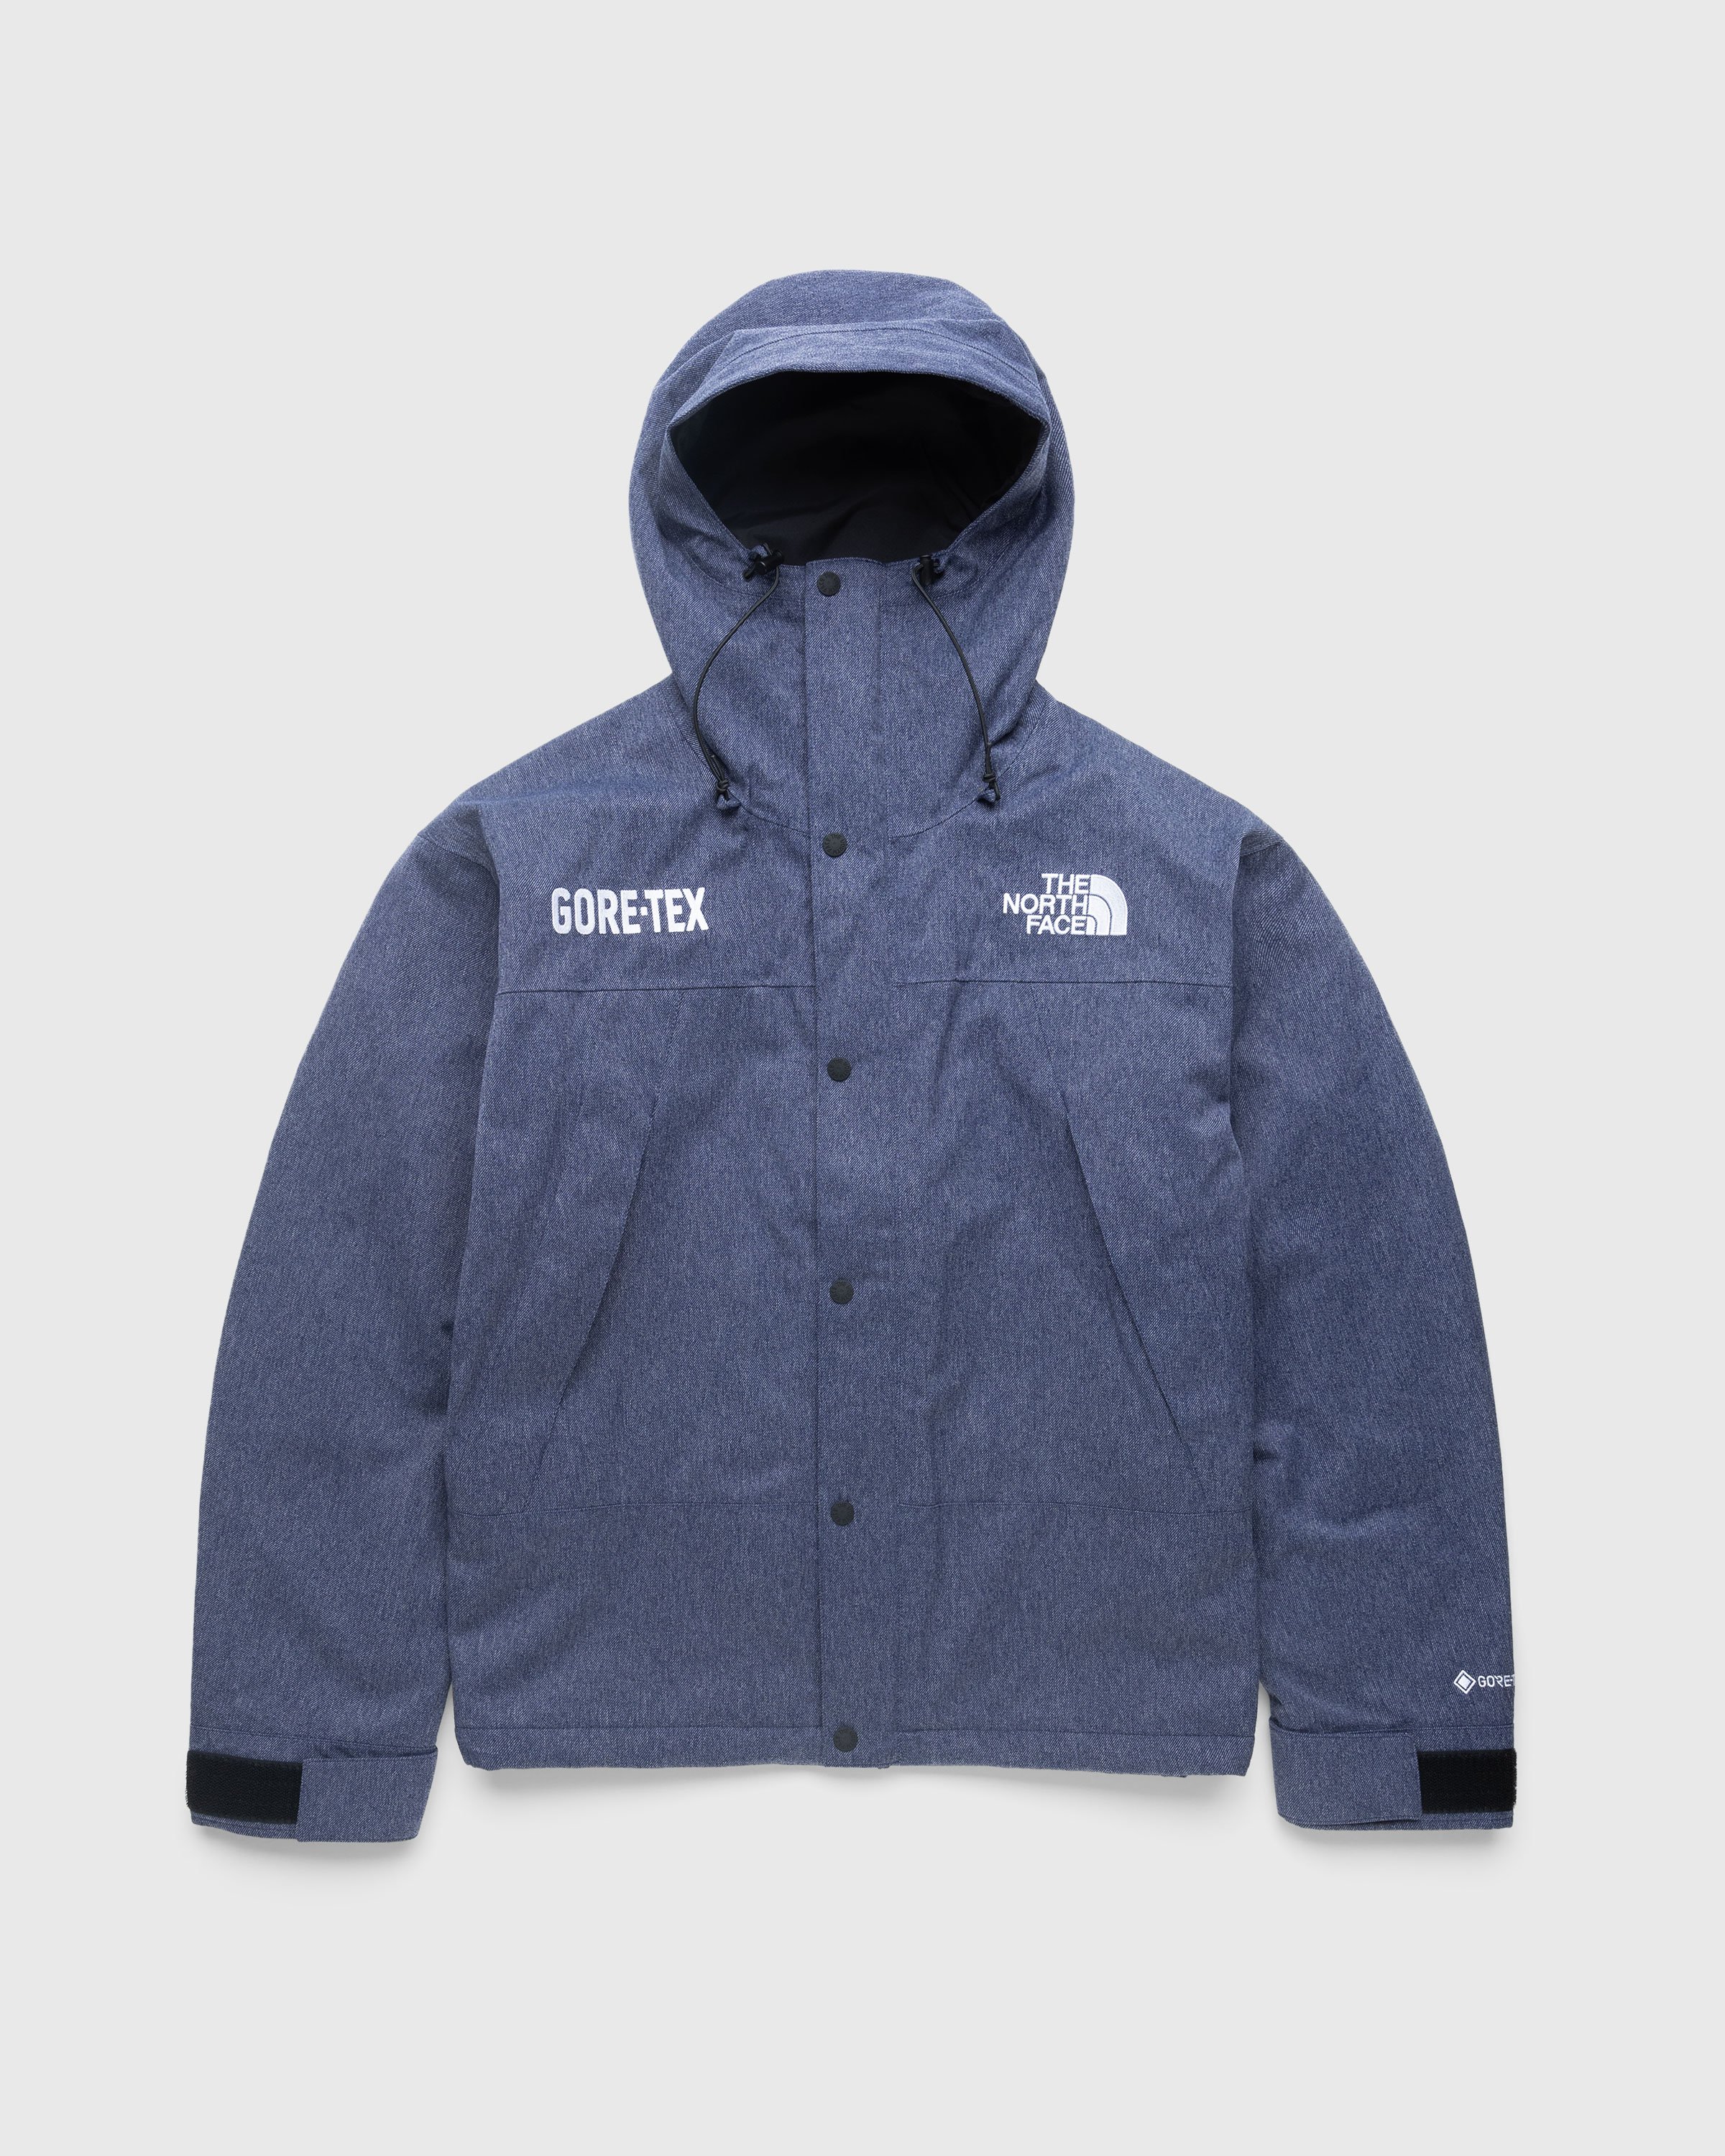 The North Face – GORE-TEX Mountain Jacket Denim Blue/TNF